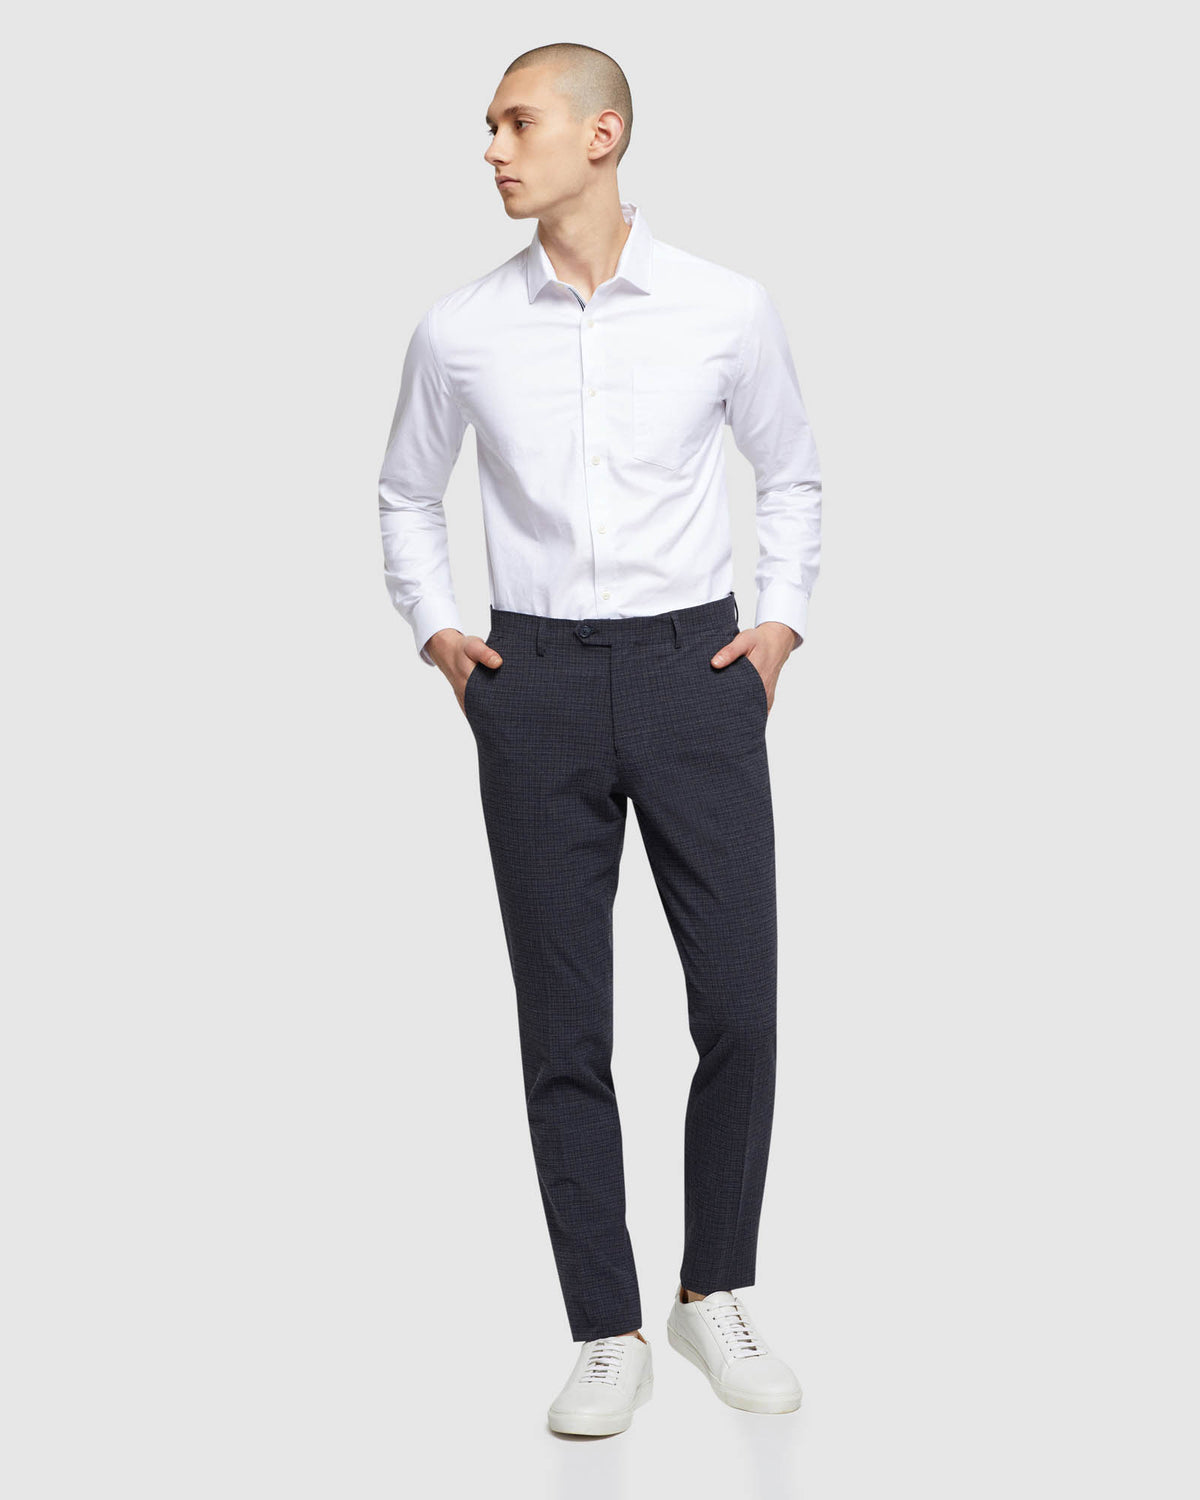 STRETCH CHECKED TROUSERS NAVY CHECK